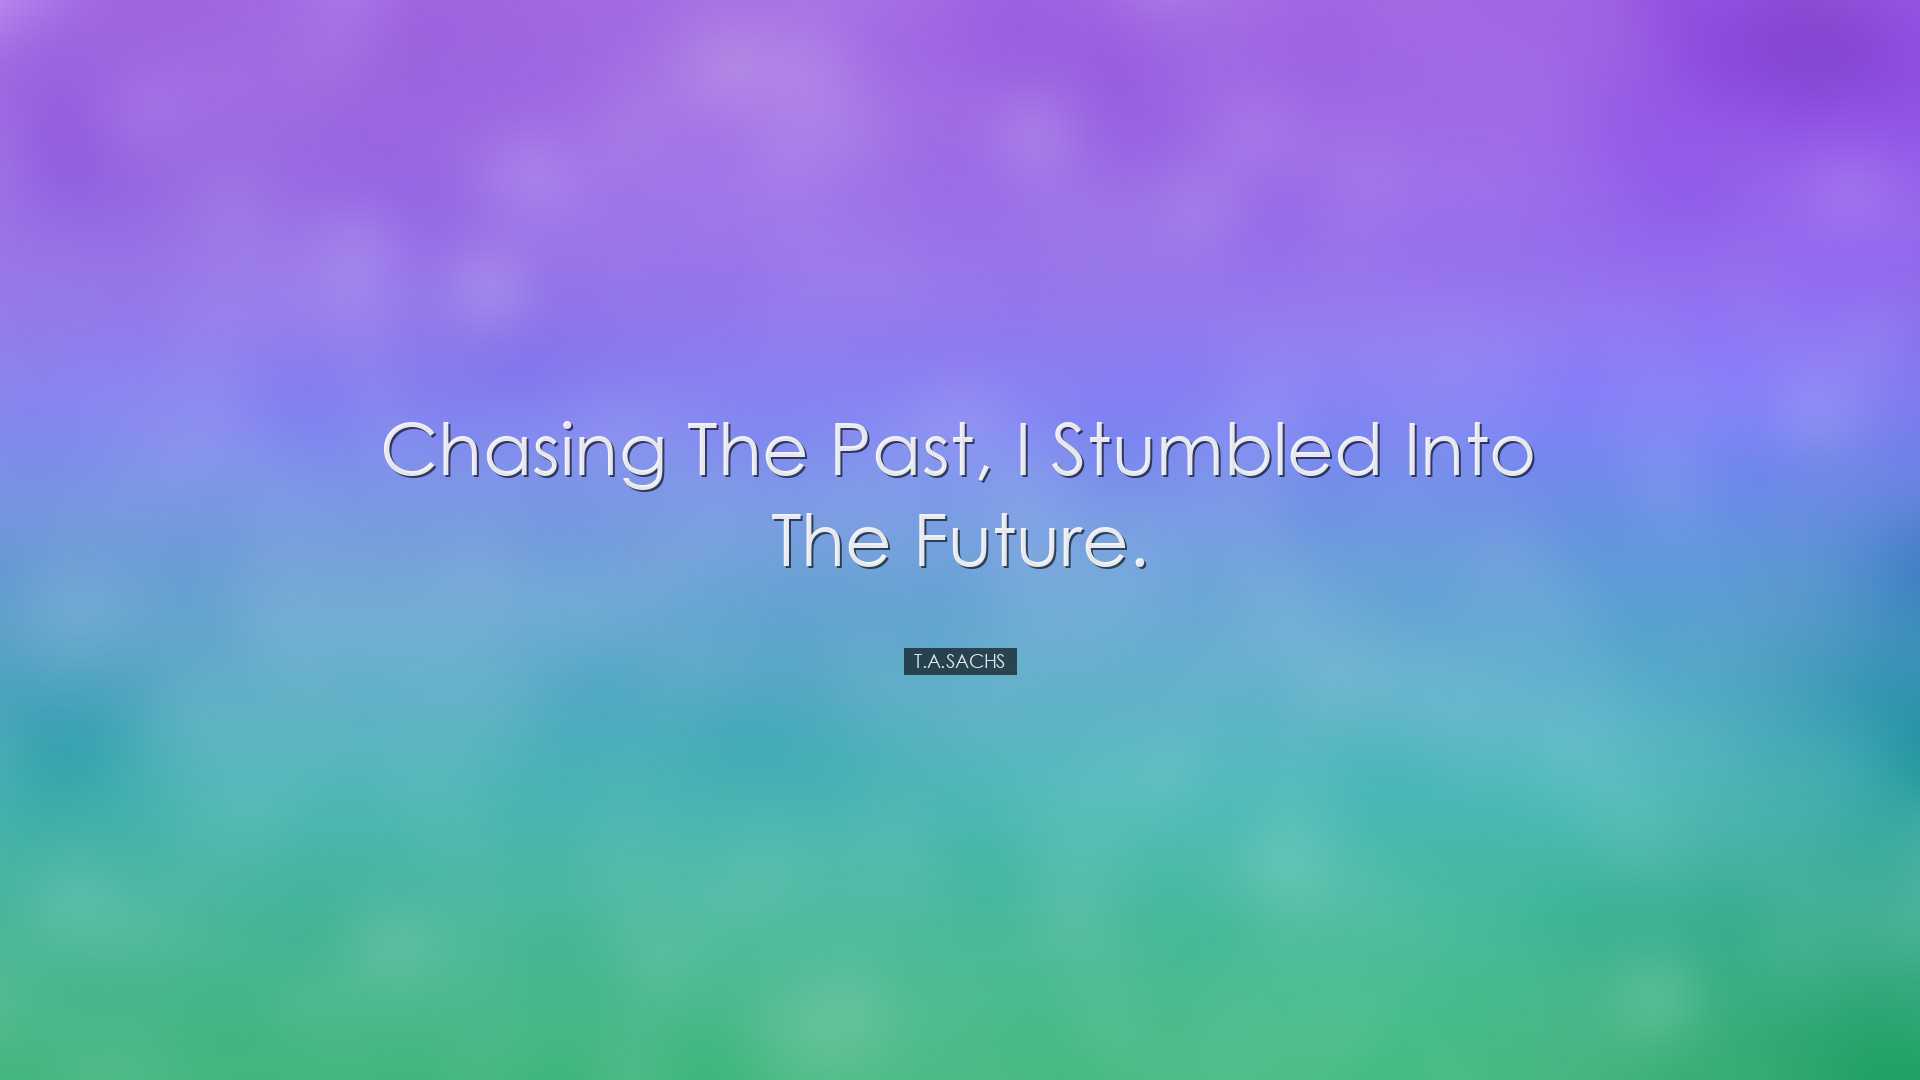 Chasing the past, I stumbled into the future. - T.A.Sachs